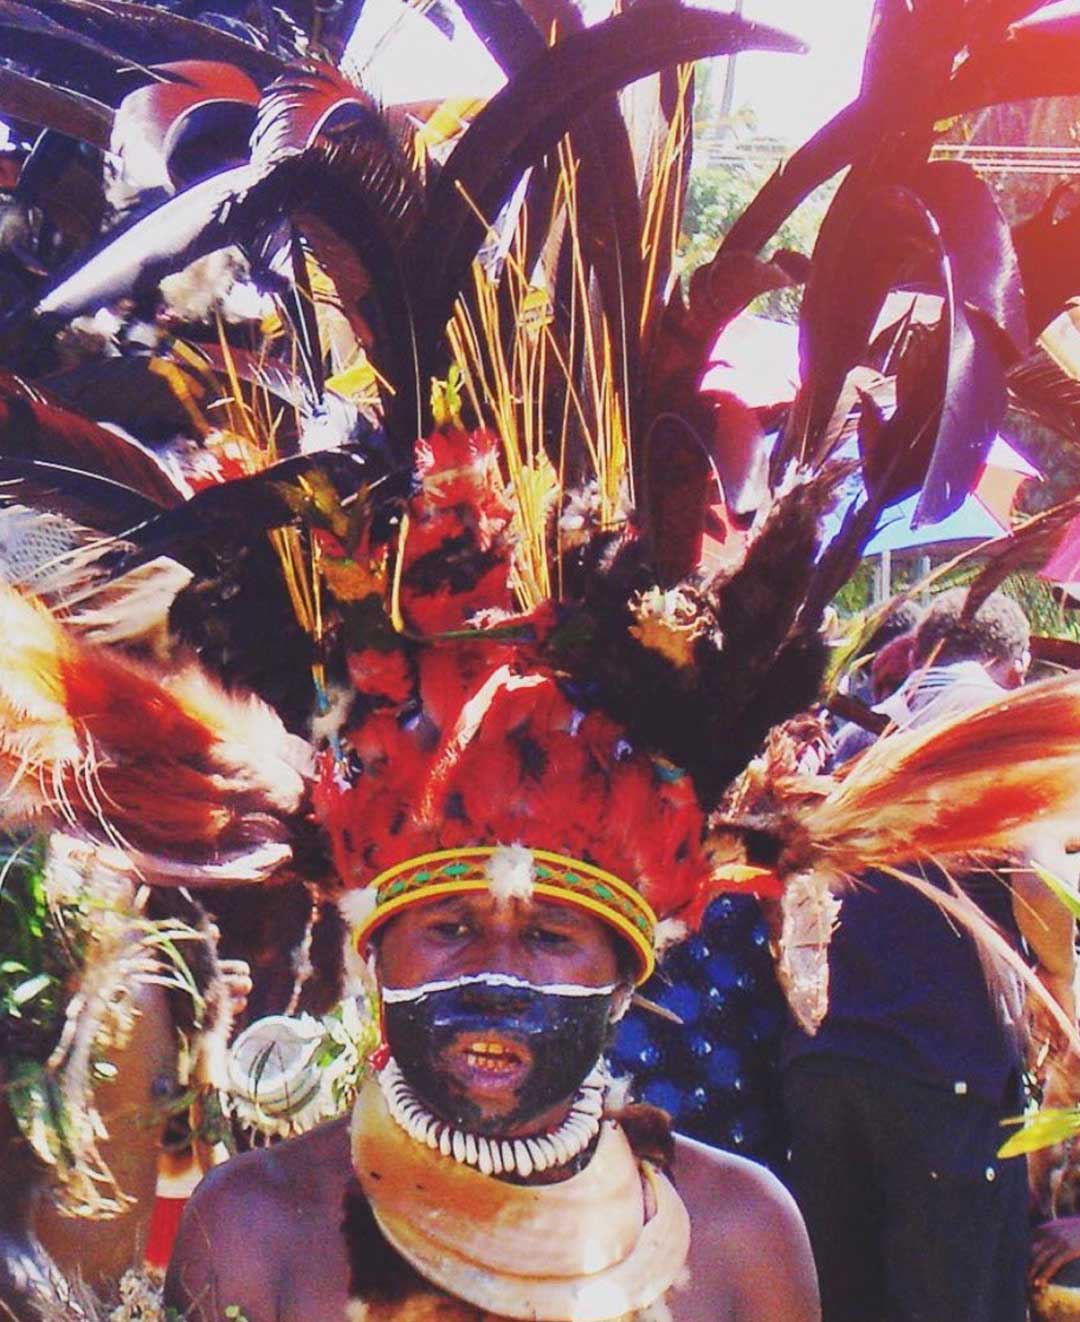 Woman in traditional dress at a sing sing in papua new guinea by Dr Zoe Norridge 